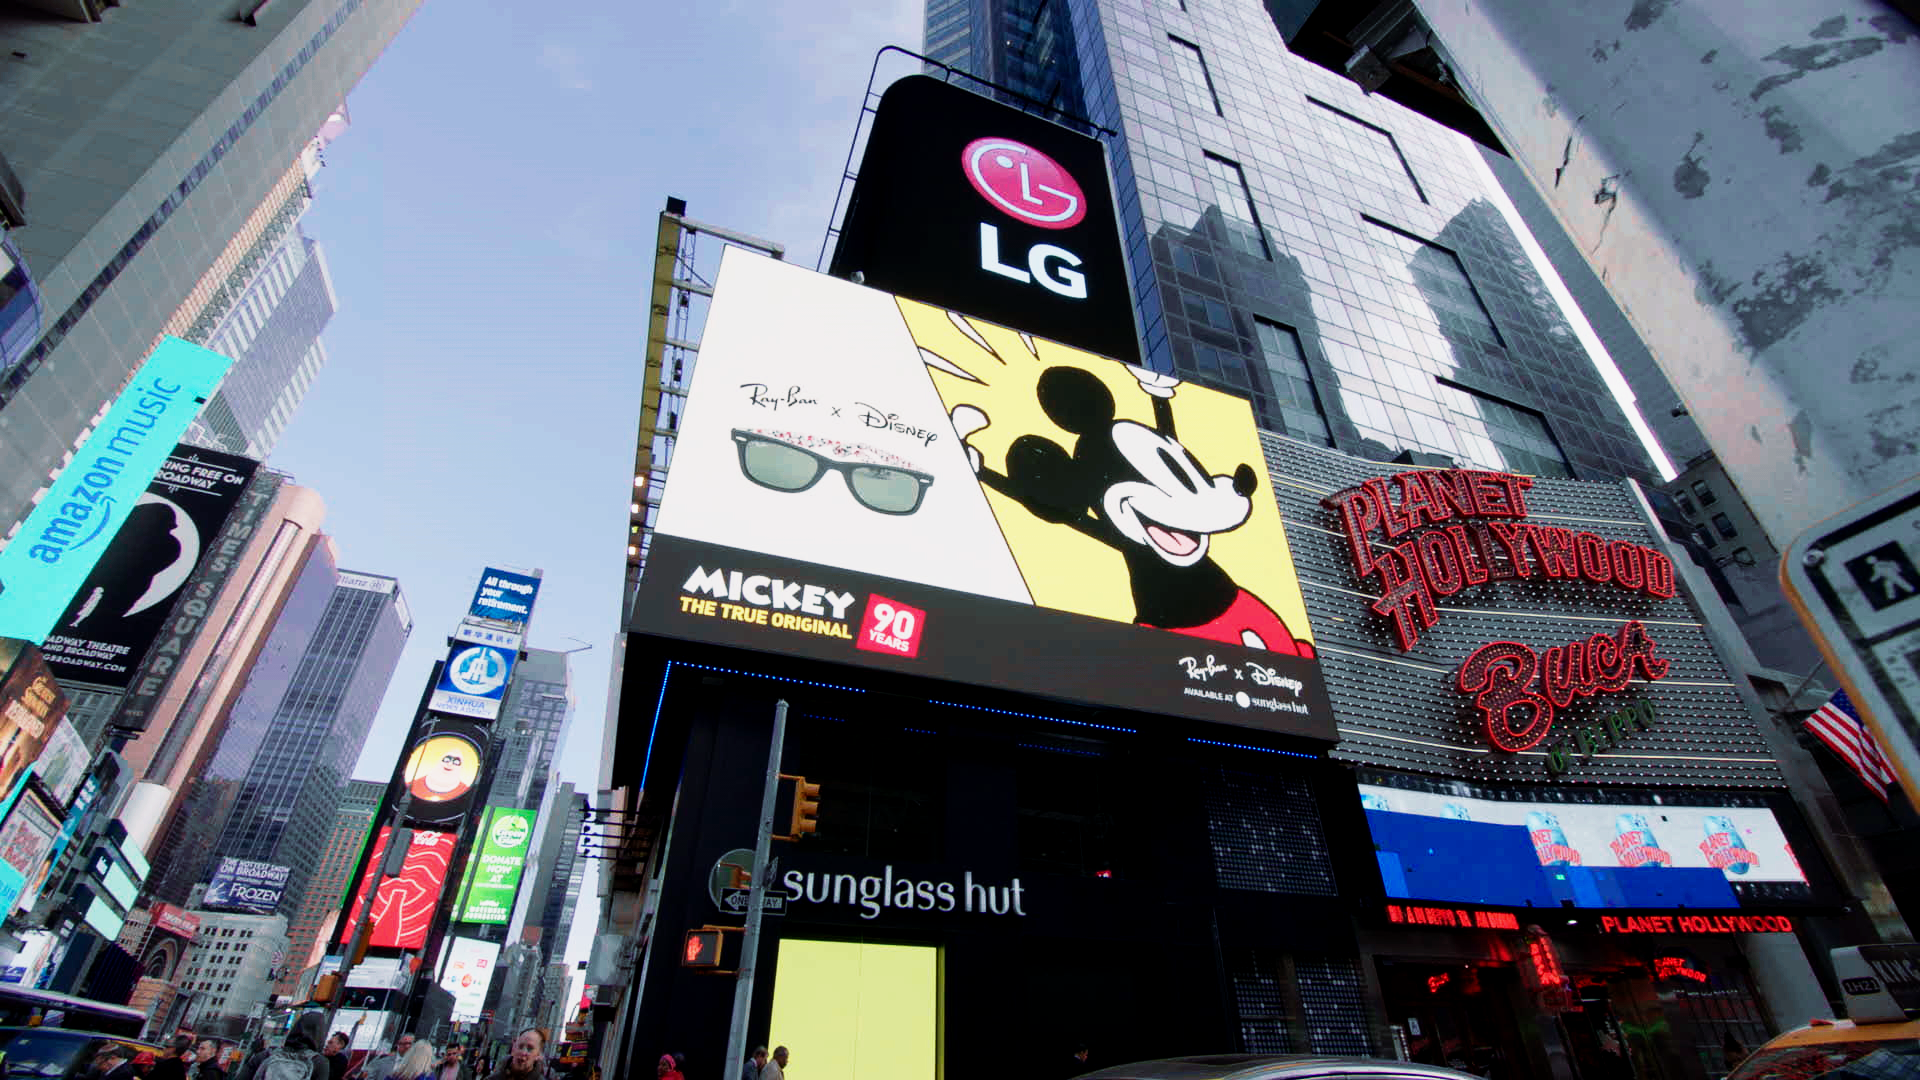 Leftchannel Motion Graphics Studio: Disney's Mickey Mouse 90th birthday celebration experiential animation Times Square